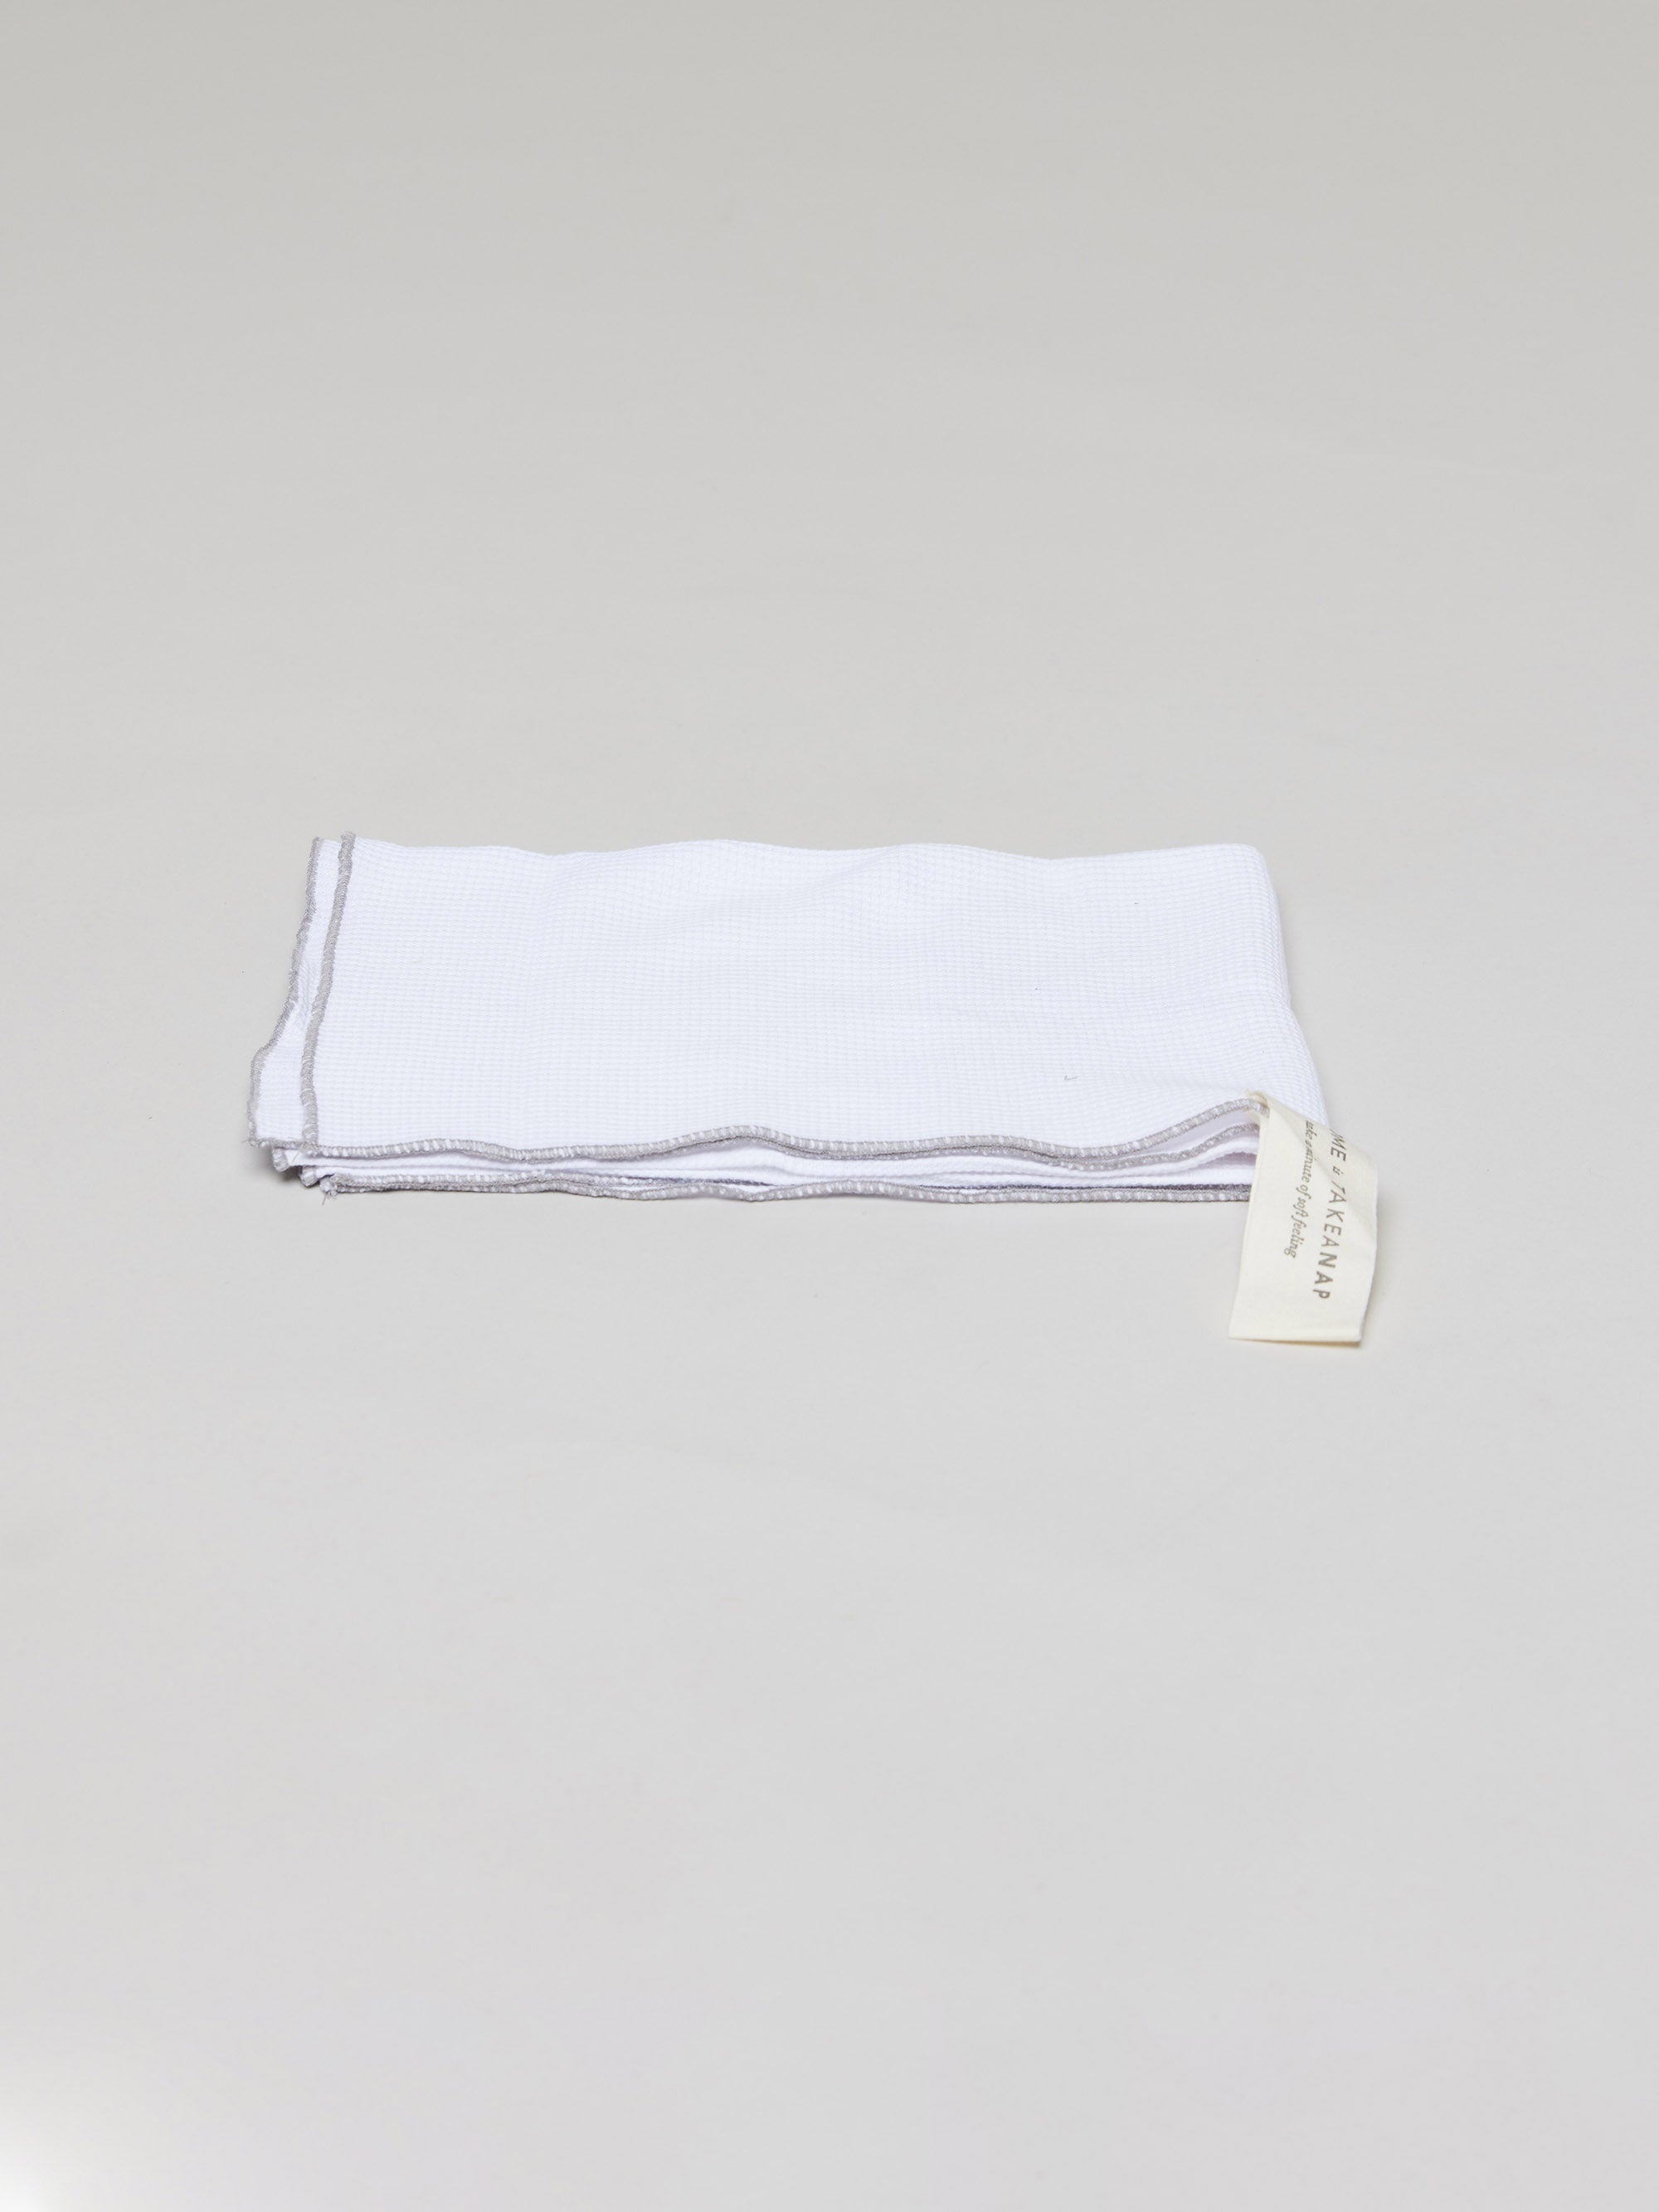 Hey welcome 2 JACQUARD | Kitchen Towel product page. Image: Folded white kitchen towel on a grey light background